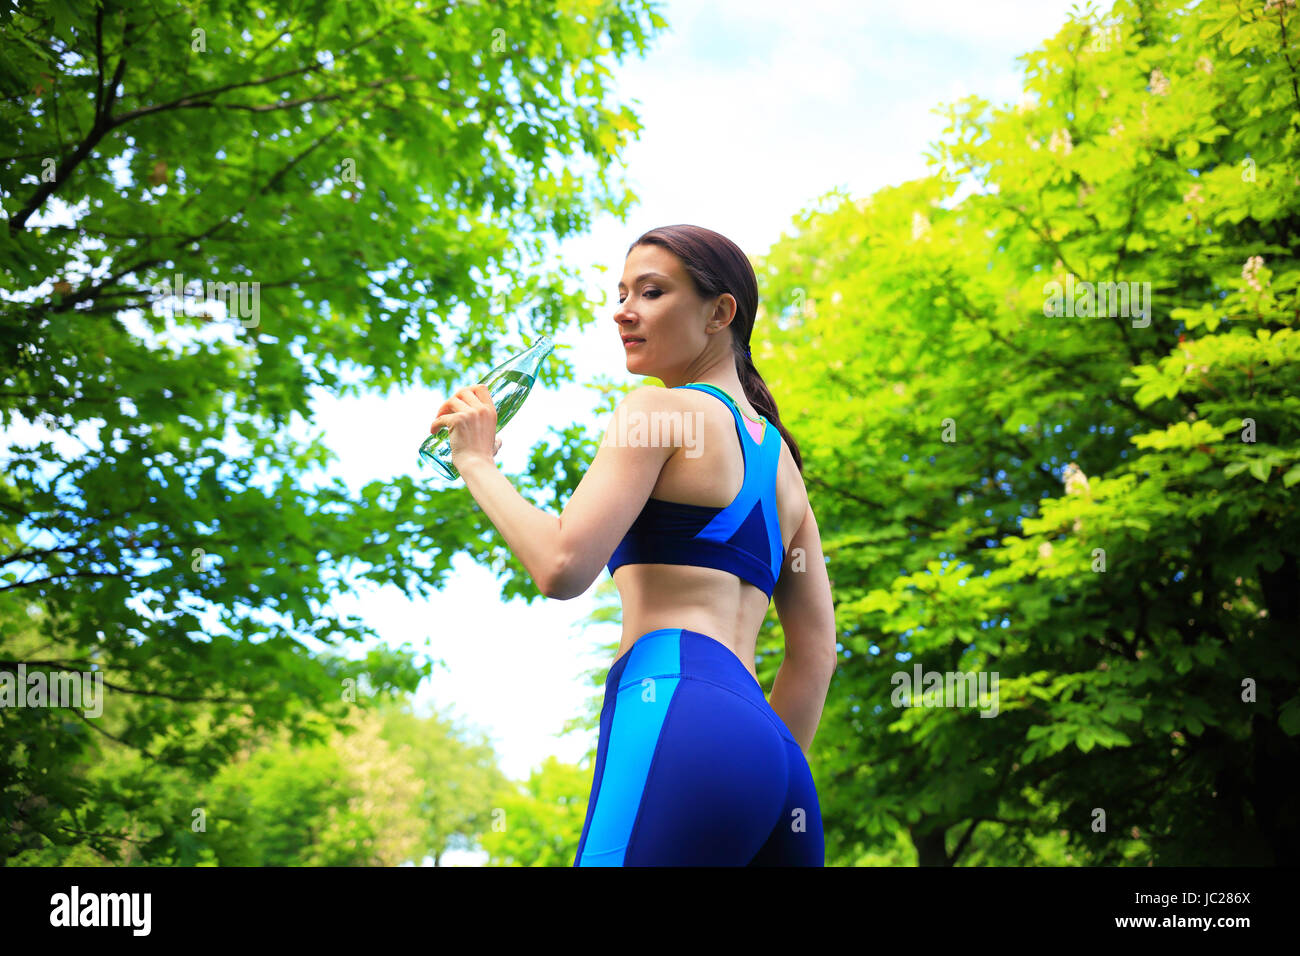 Working out scene. Girl with water bottle on green nature background. Summer healthy lifestyle background. Stock Photo